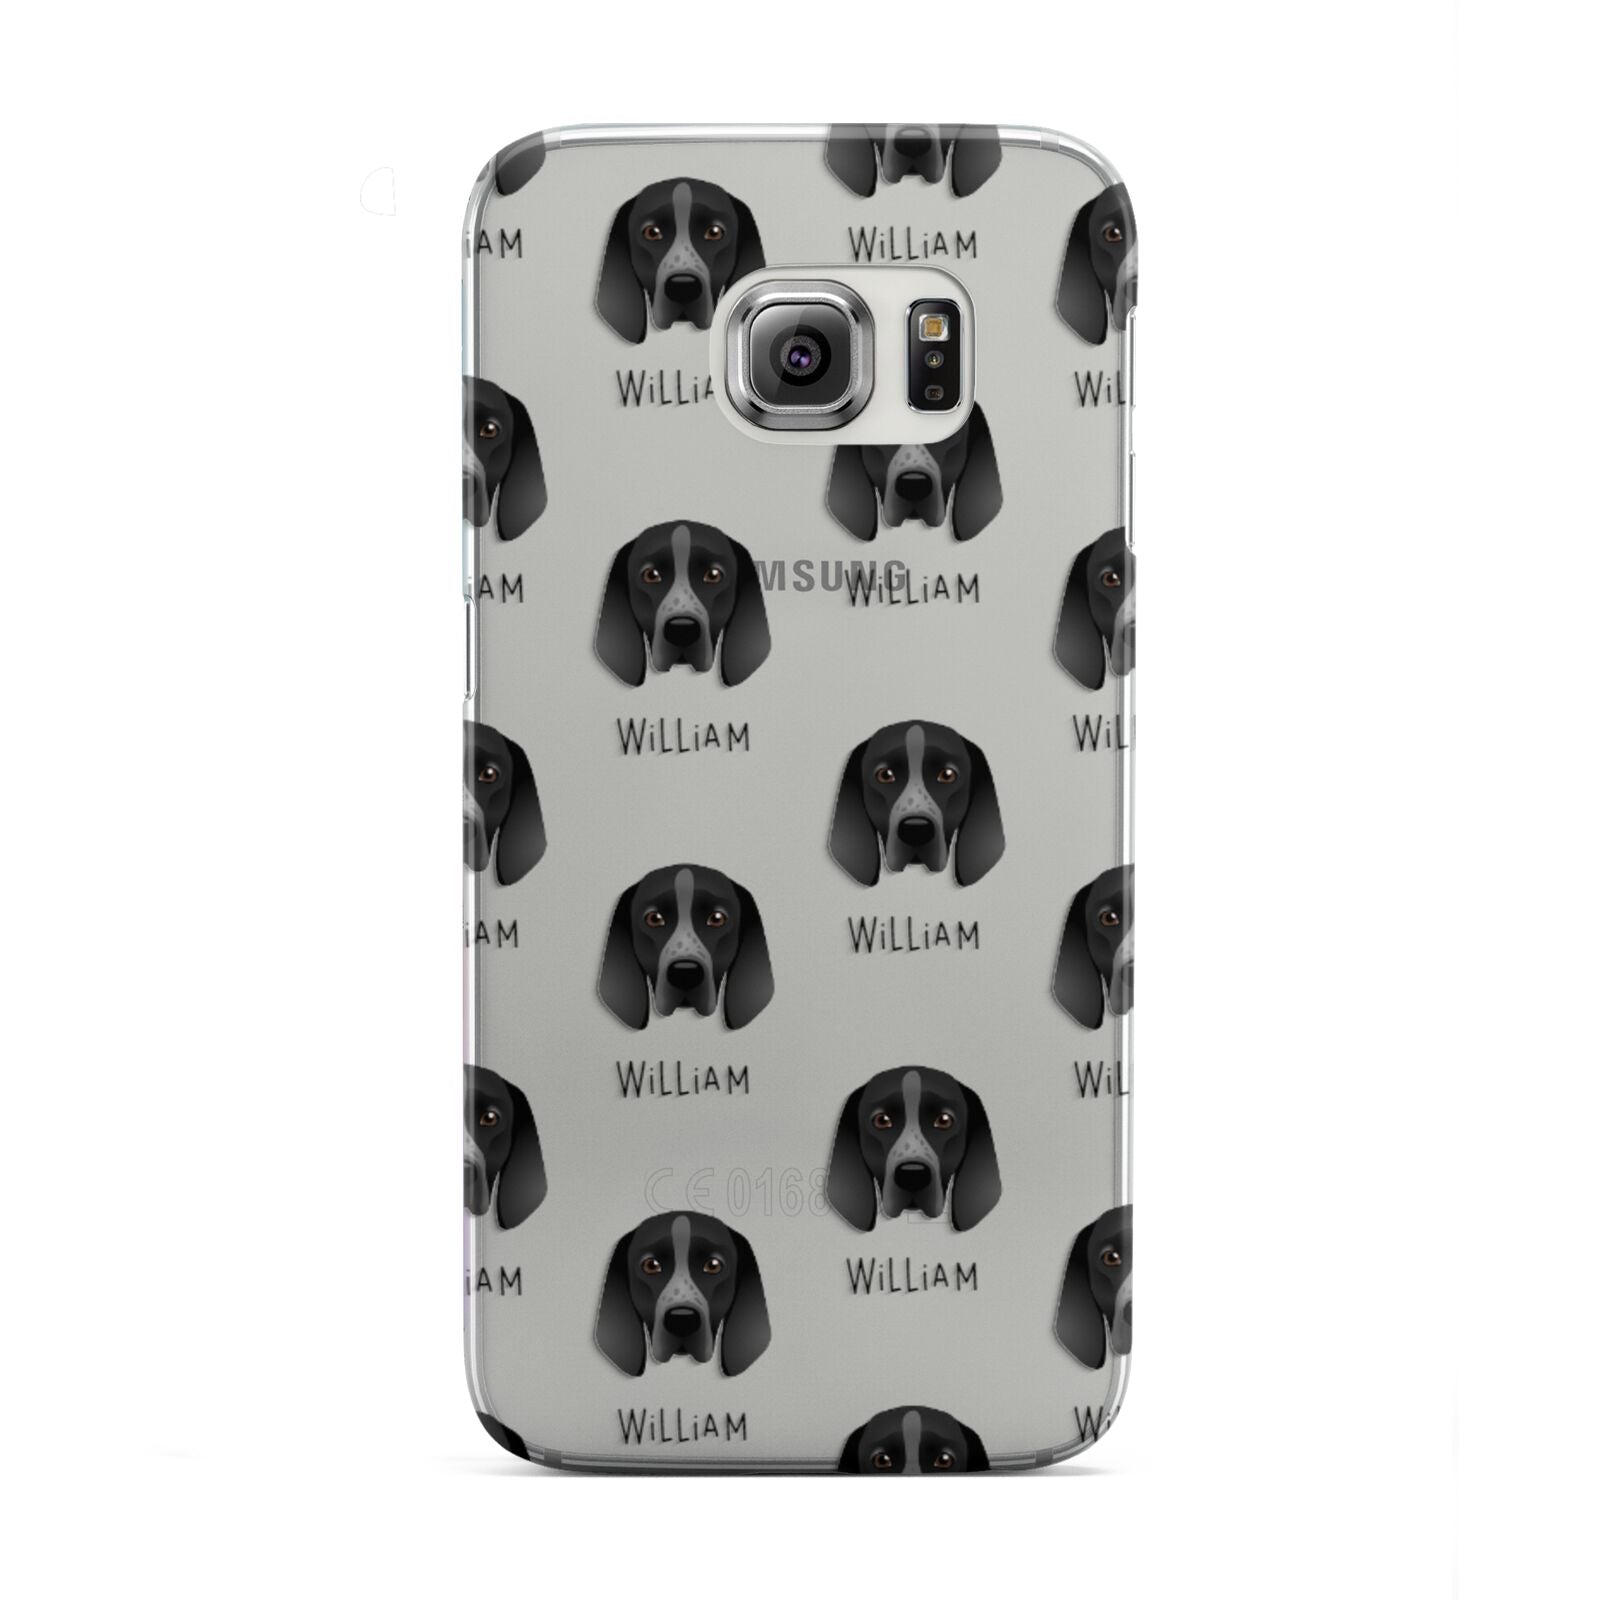 Braque D Auvergne Icon with Name Samsung Galaxy S6 Edge Case